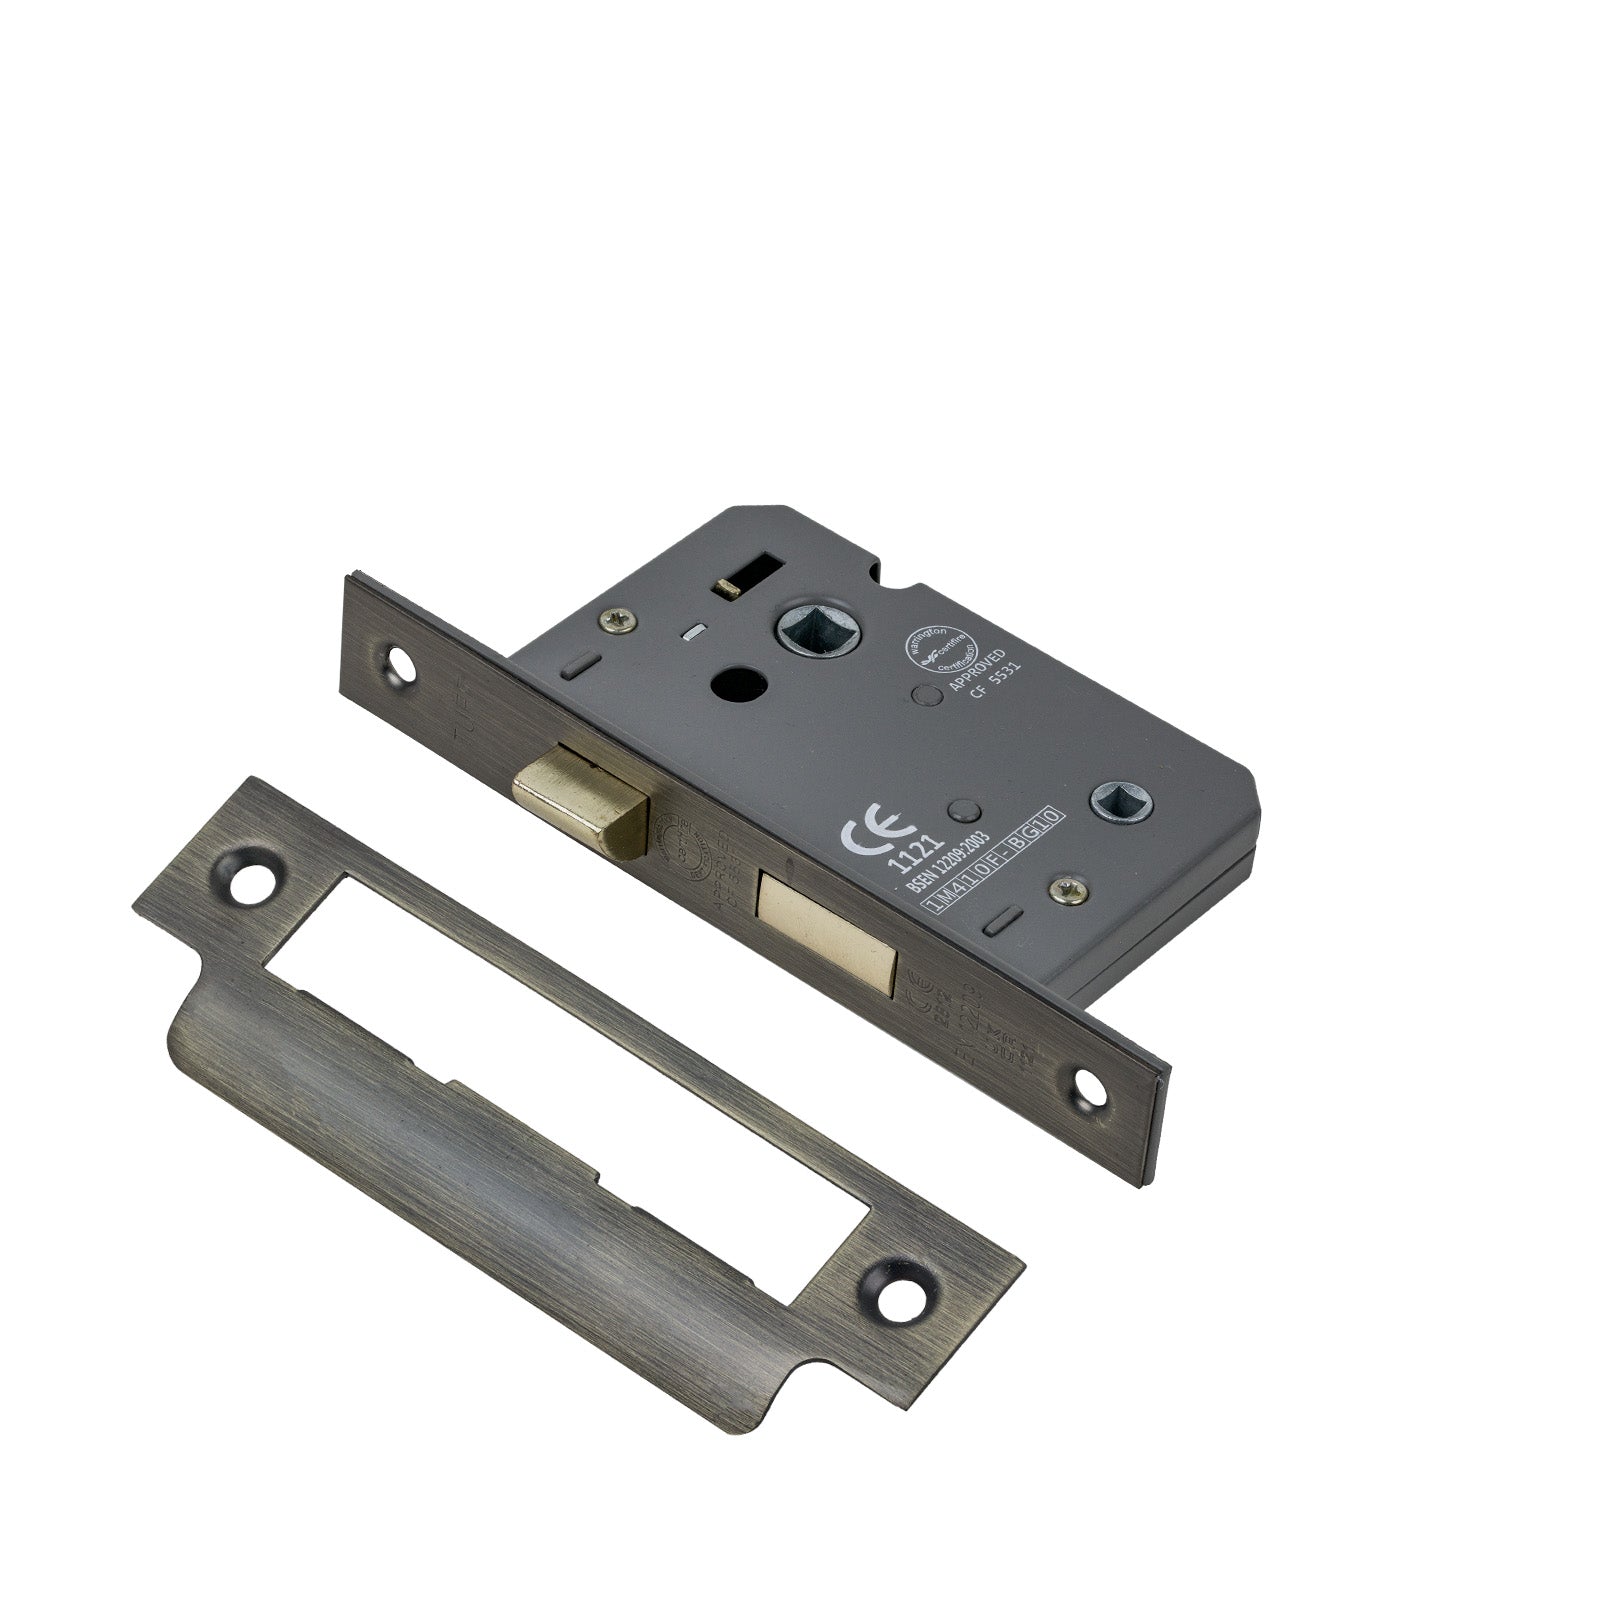 SHOW Bathroom Sash Lock - 2.5 Inch with Urban Bronze finished forend and striker plate